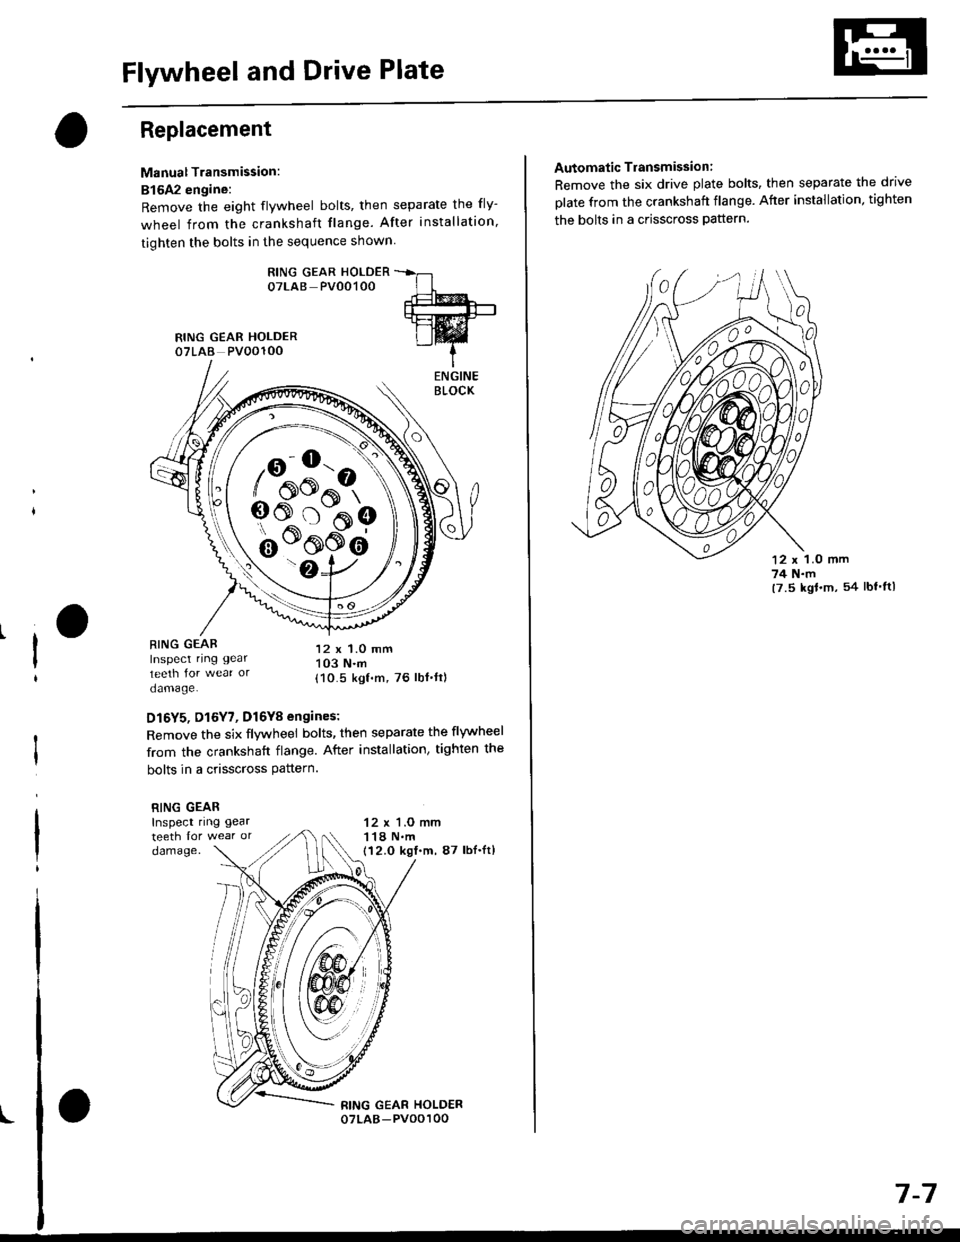 HONDA CIVIC 1998 6.G Workshop Manual Flywheel and Drive Plate
Replacement
Manual Transmission:
816A2 engine:
Remove the eight flywheel bolts, then separate the fly-
wheel from the crankshaft flange. After installation
tiohten the bolts 